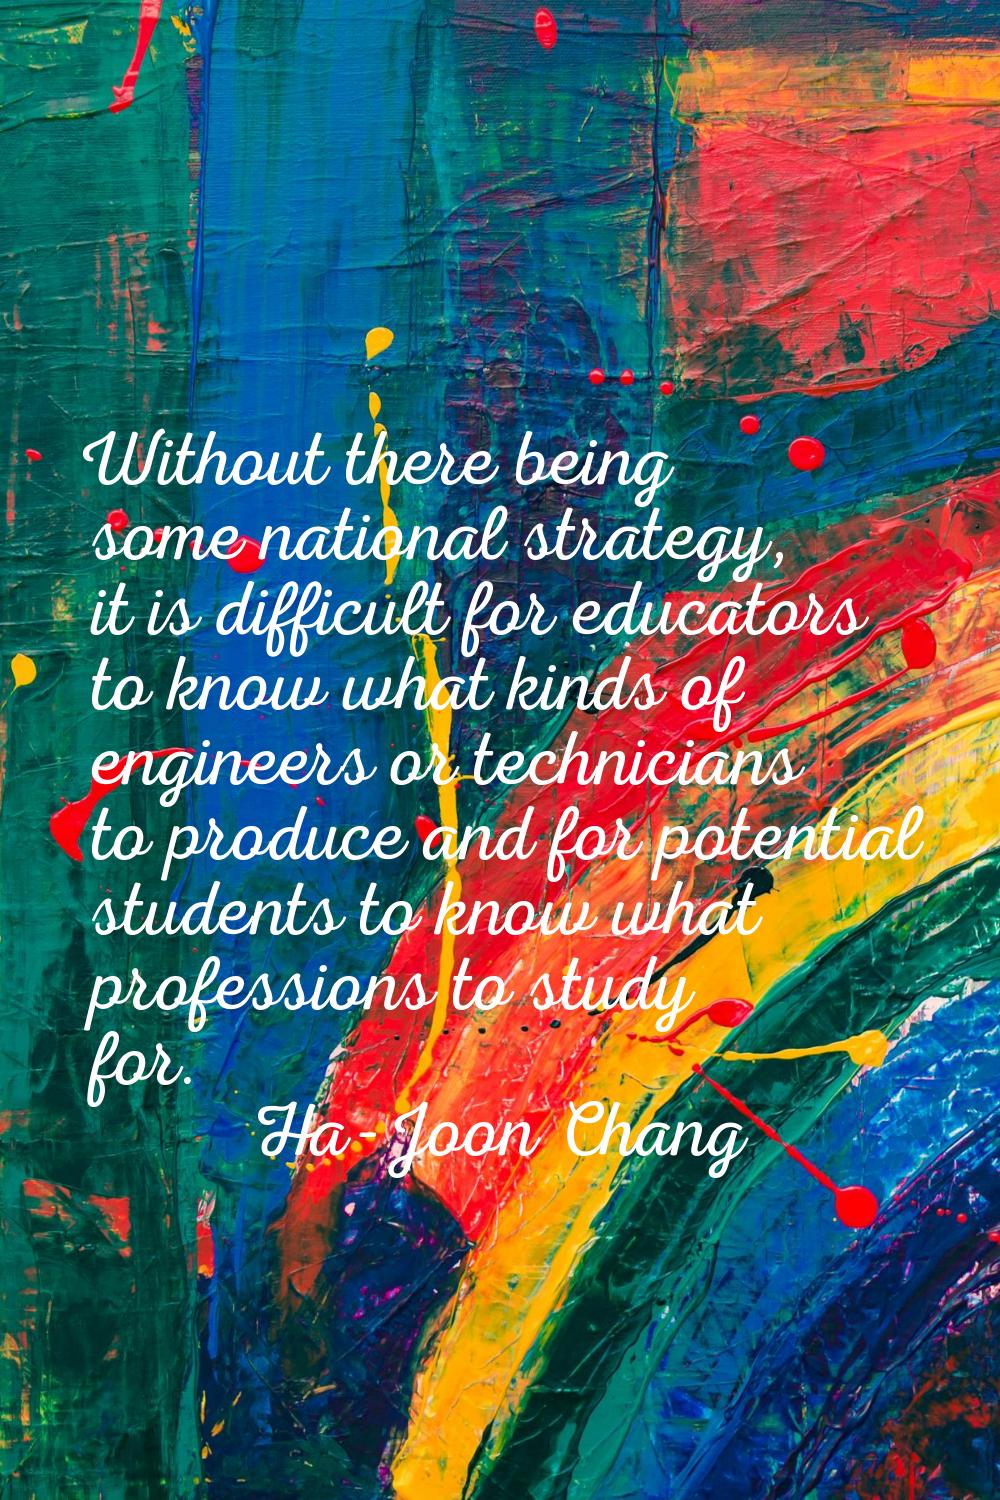 Without there being some national strategy, it is difficult for educators to know what kinds of eng